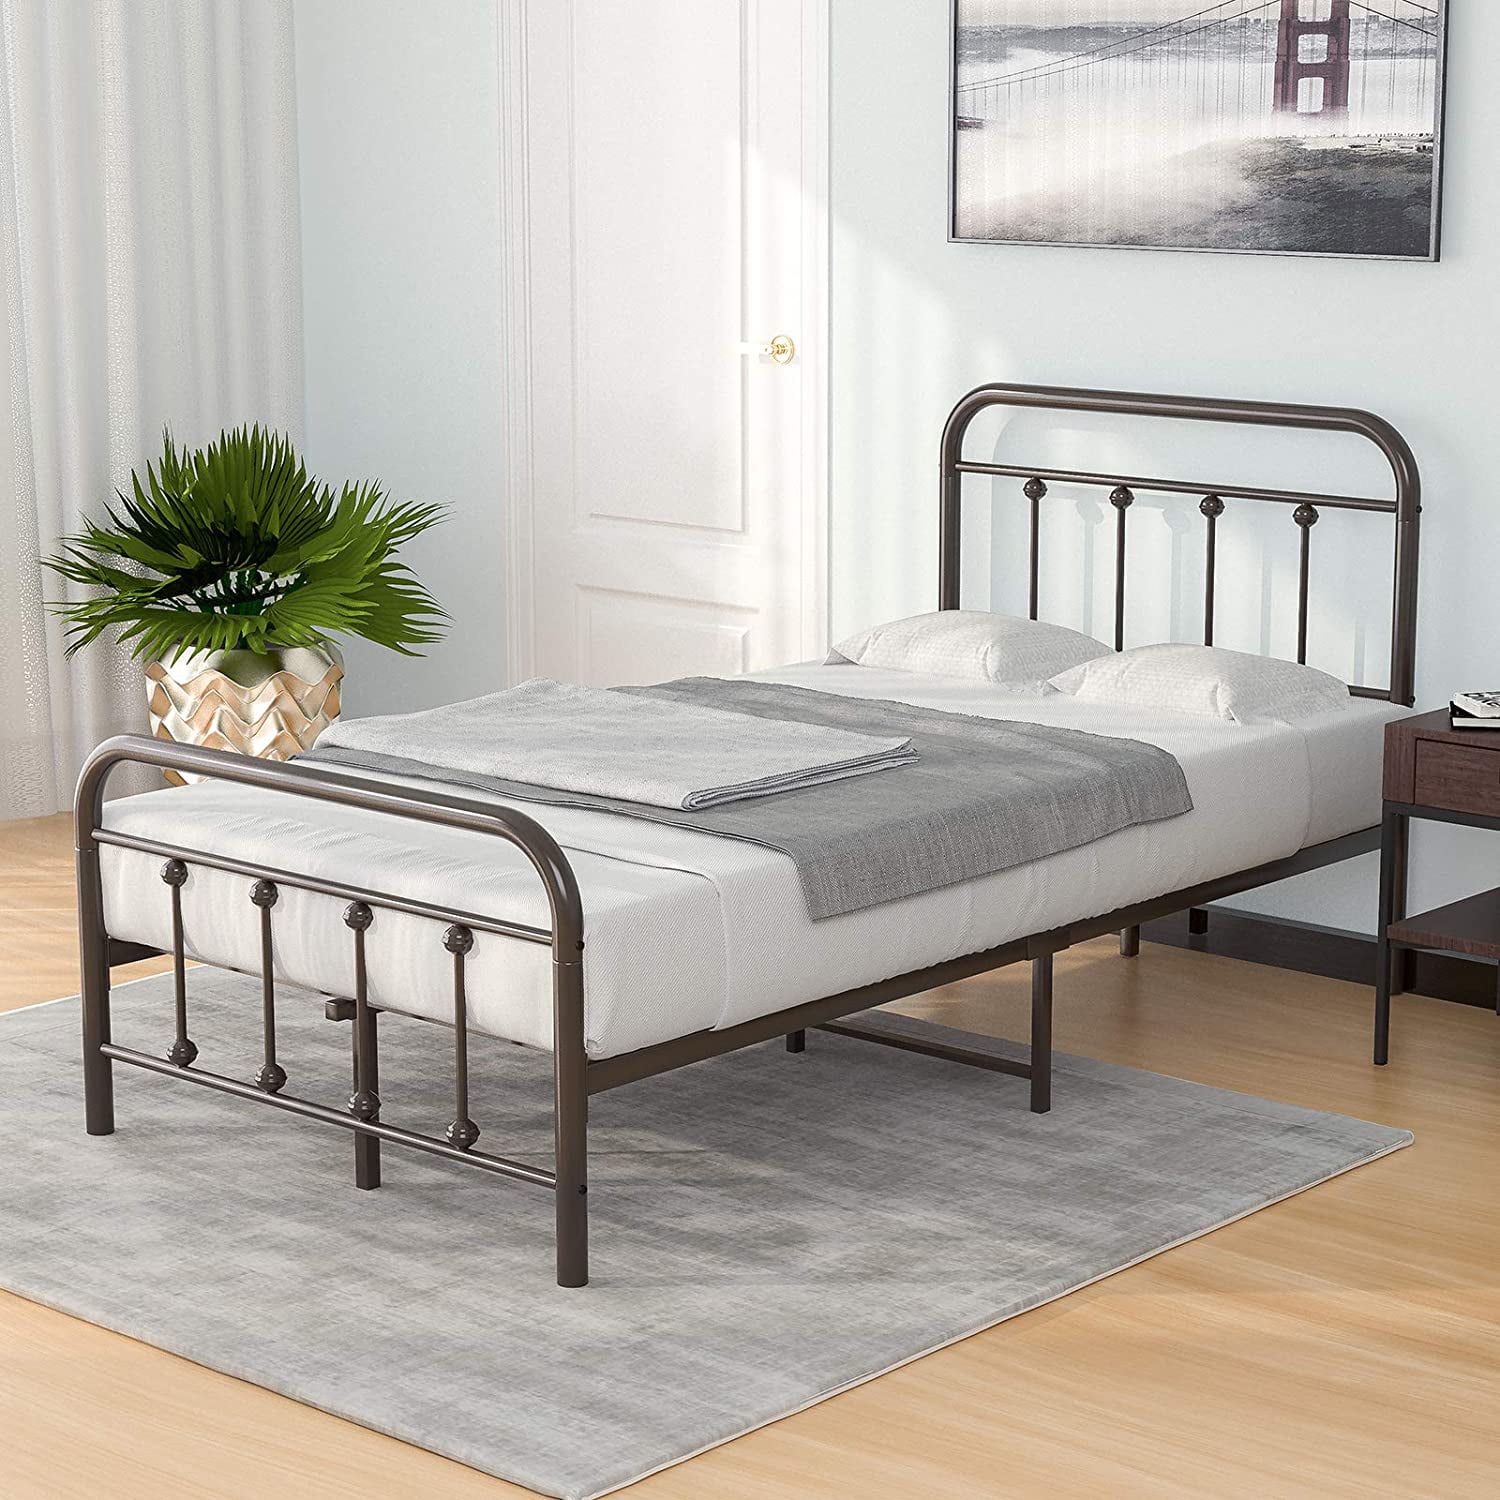 Mecor Metal Twin Bed Frame With Vintage, Twin Bed With Frame And Mattress